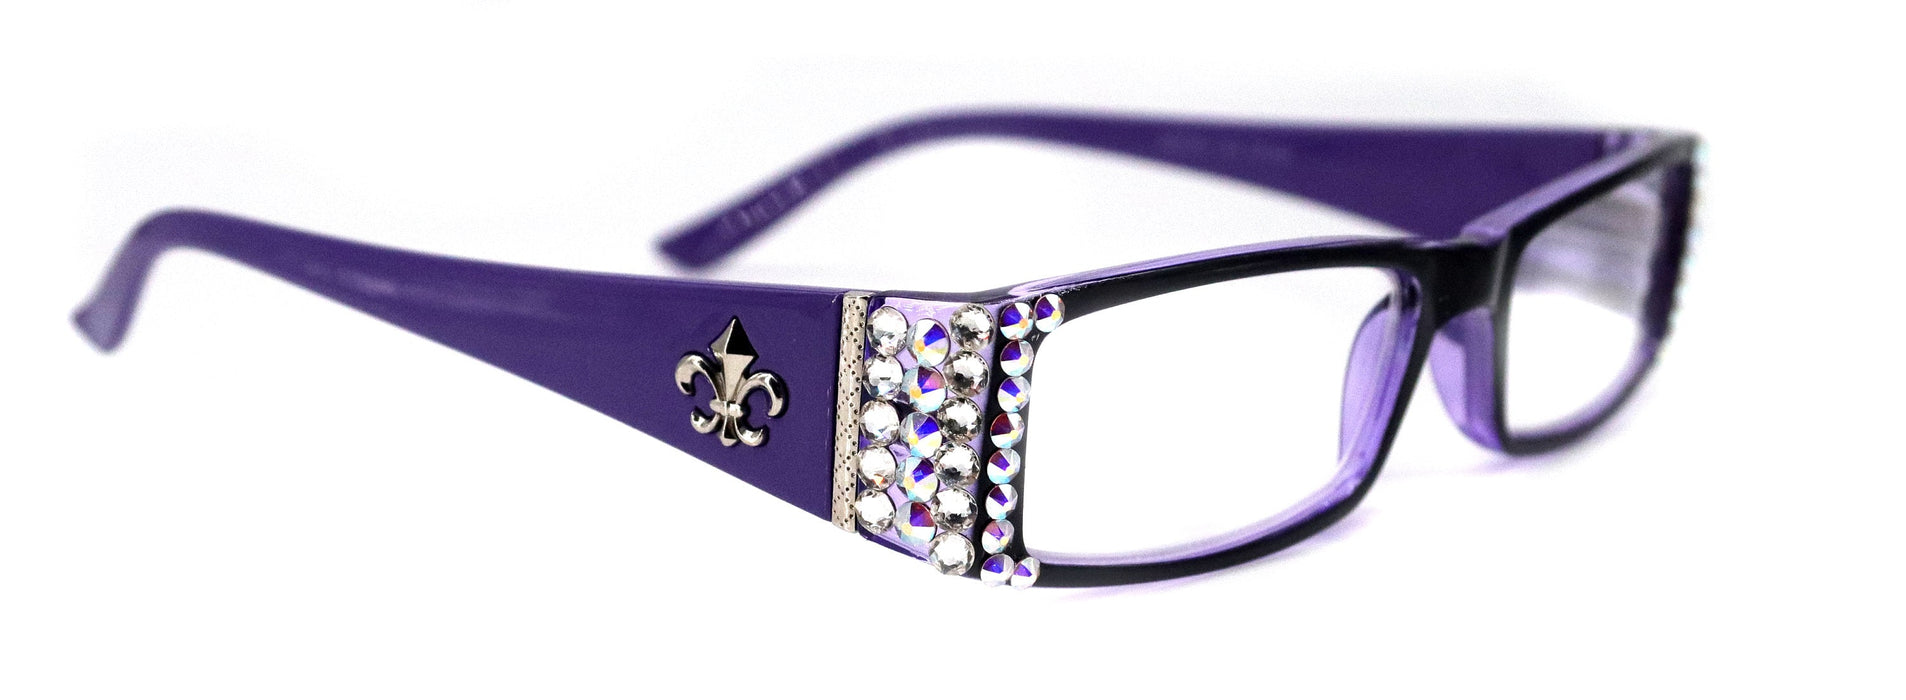 The French, (Bling) (Fleur De Lis) Women Reading Glasses W Genuine European Crystals +1 .. +3 (Purple) Frame, NY Fifth Avenue